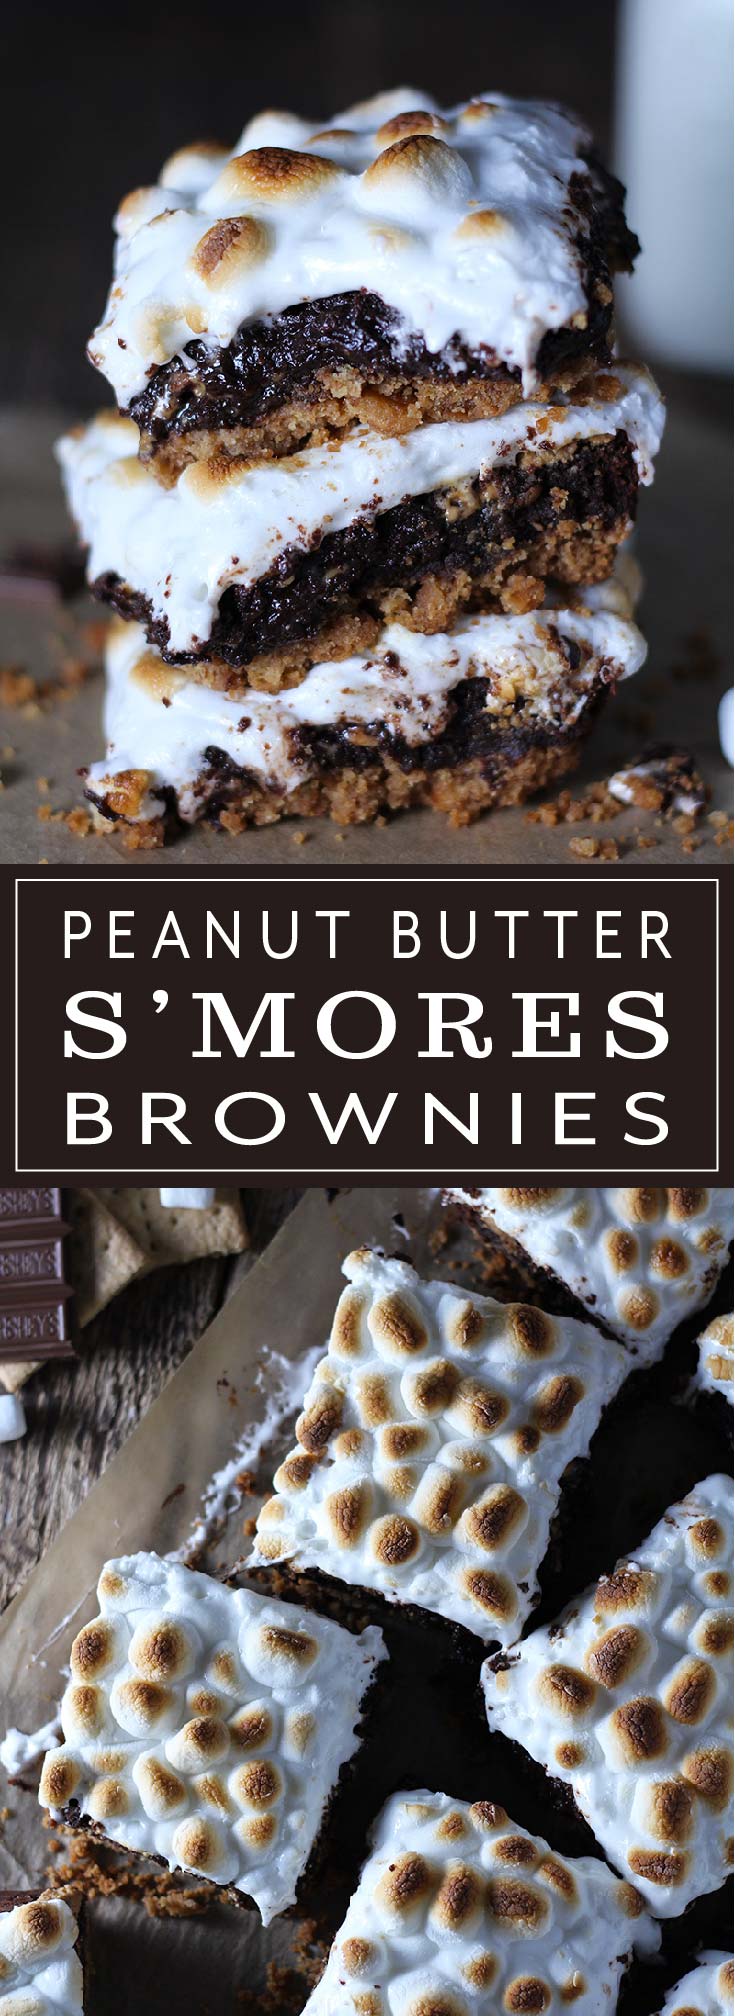 Graham cracker crust covered with fudgy brownies swirled with peanut butter and topped with melted marshmallows. Nothing says summer like s’mores over the campfire and these Peanut Butter S’mores Brownies take summer to the next level!